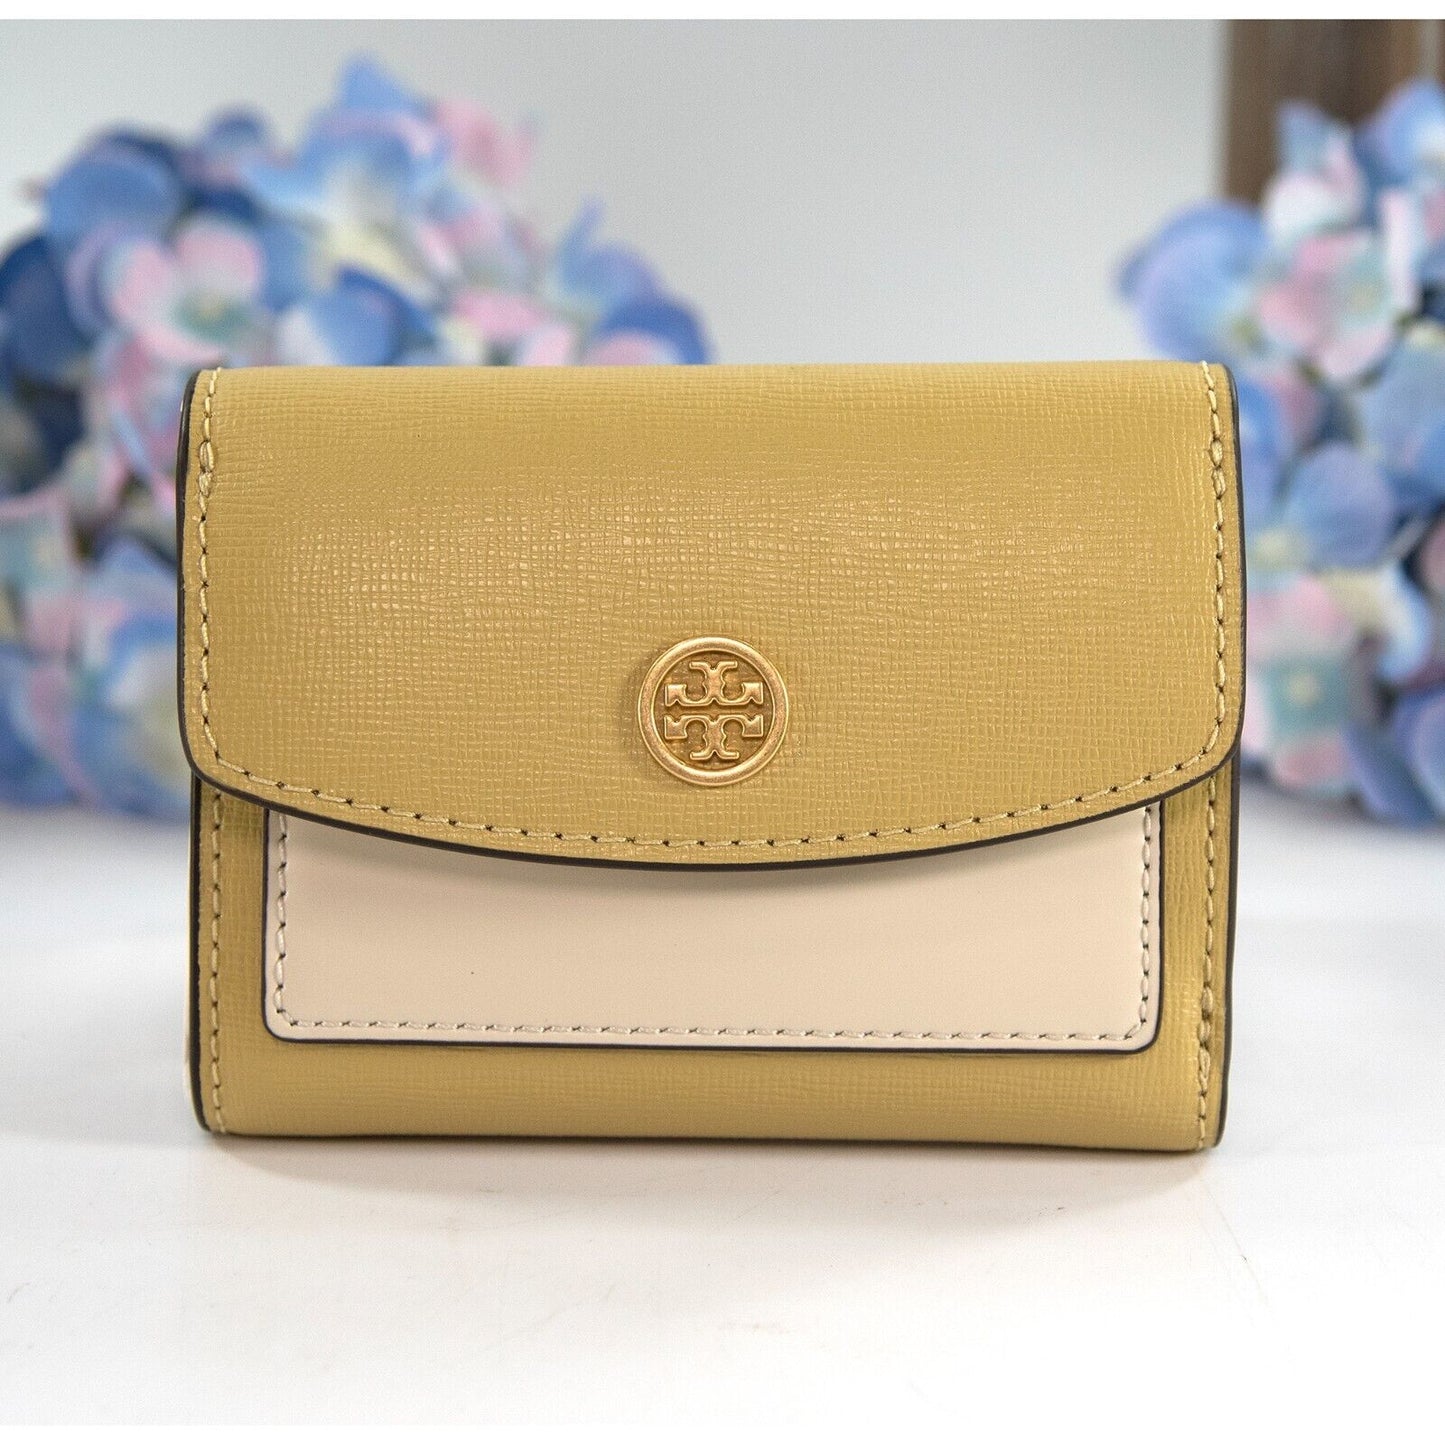 Tory Burch Robinson Colorblock Beeswax Leather Small Compact Wallet NWT